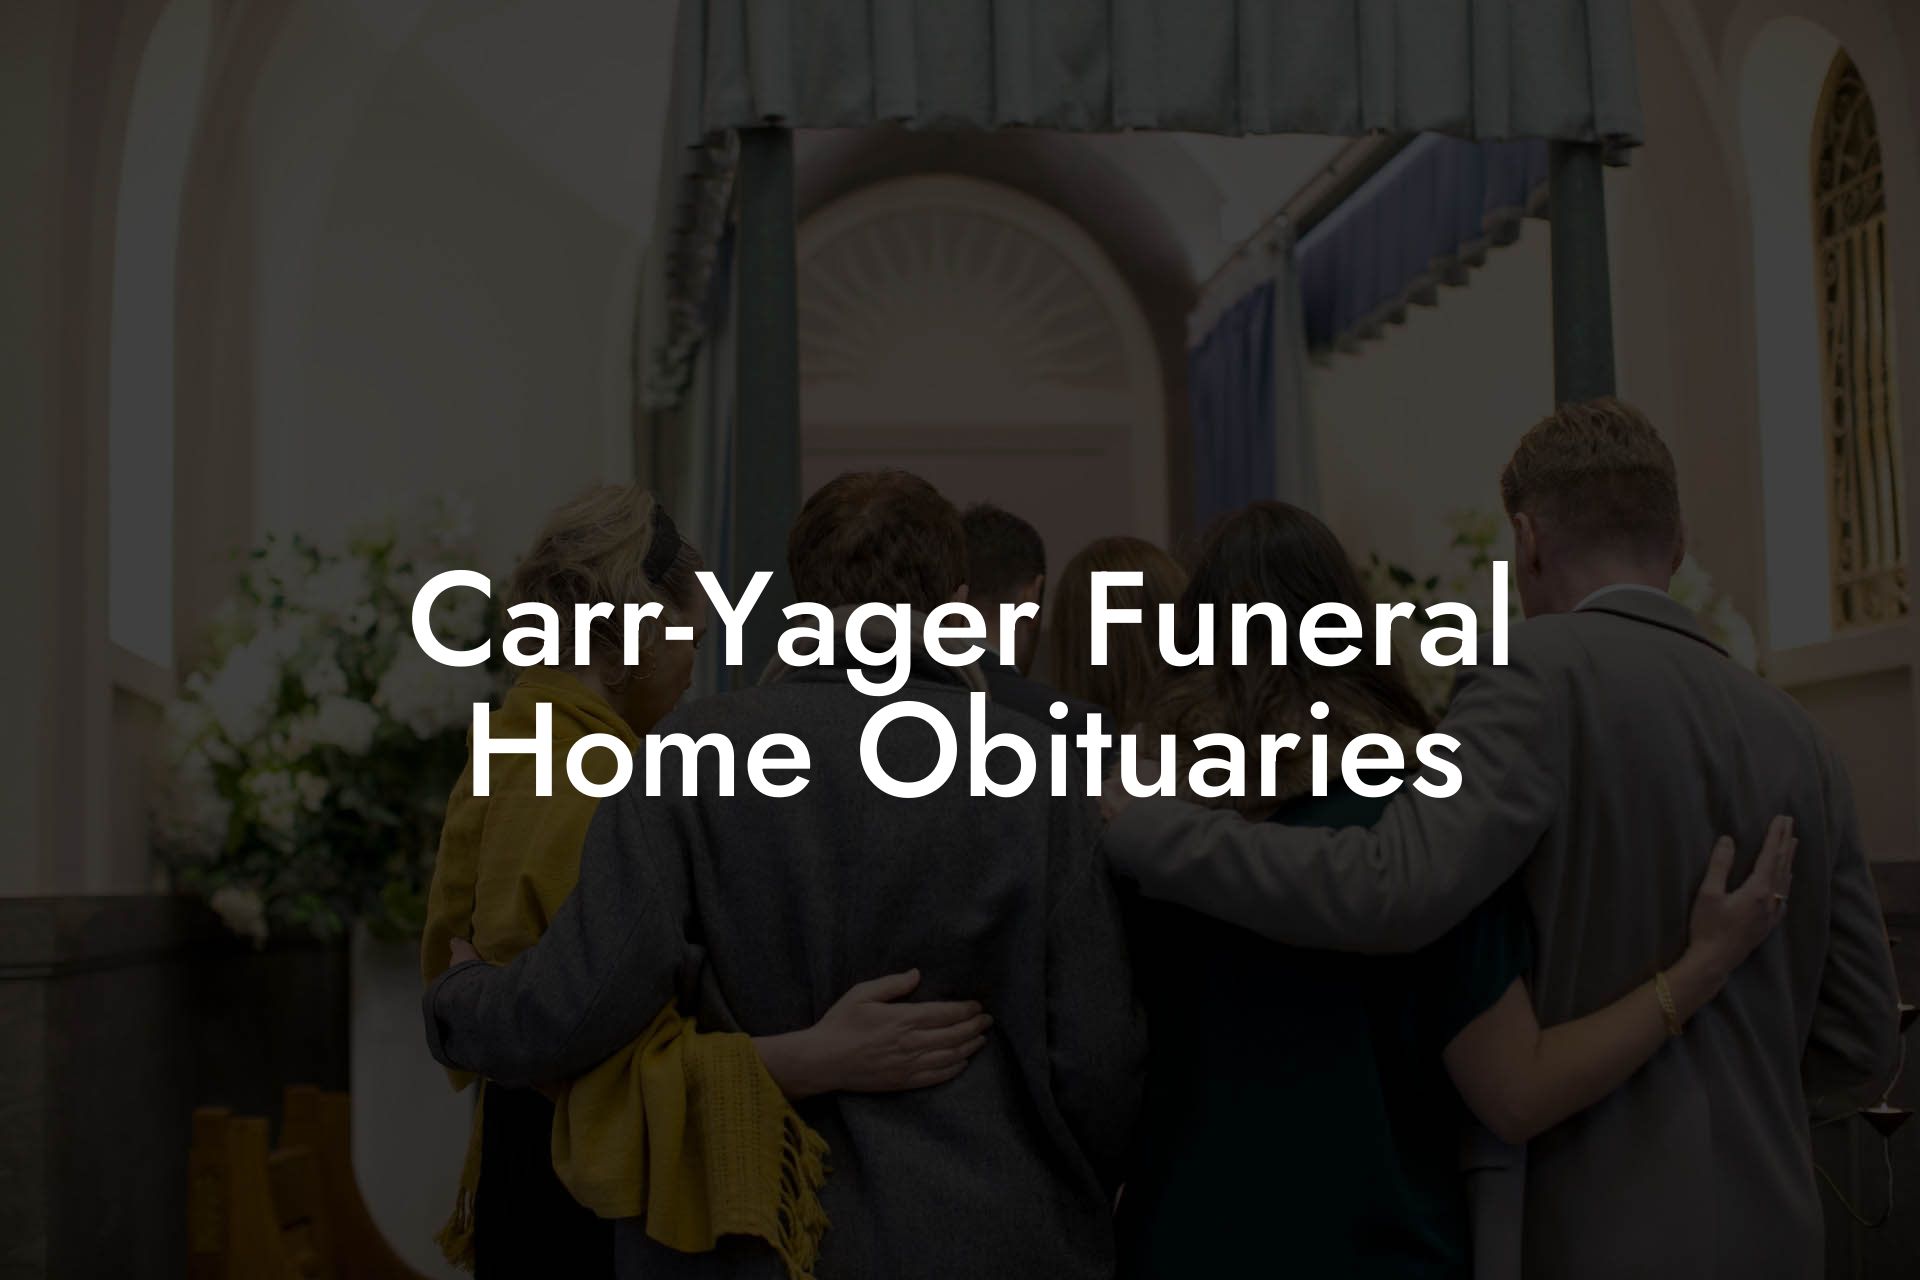 Carr-Yager Funeral Home Obituaries